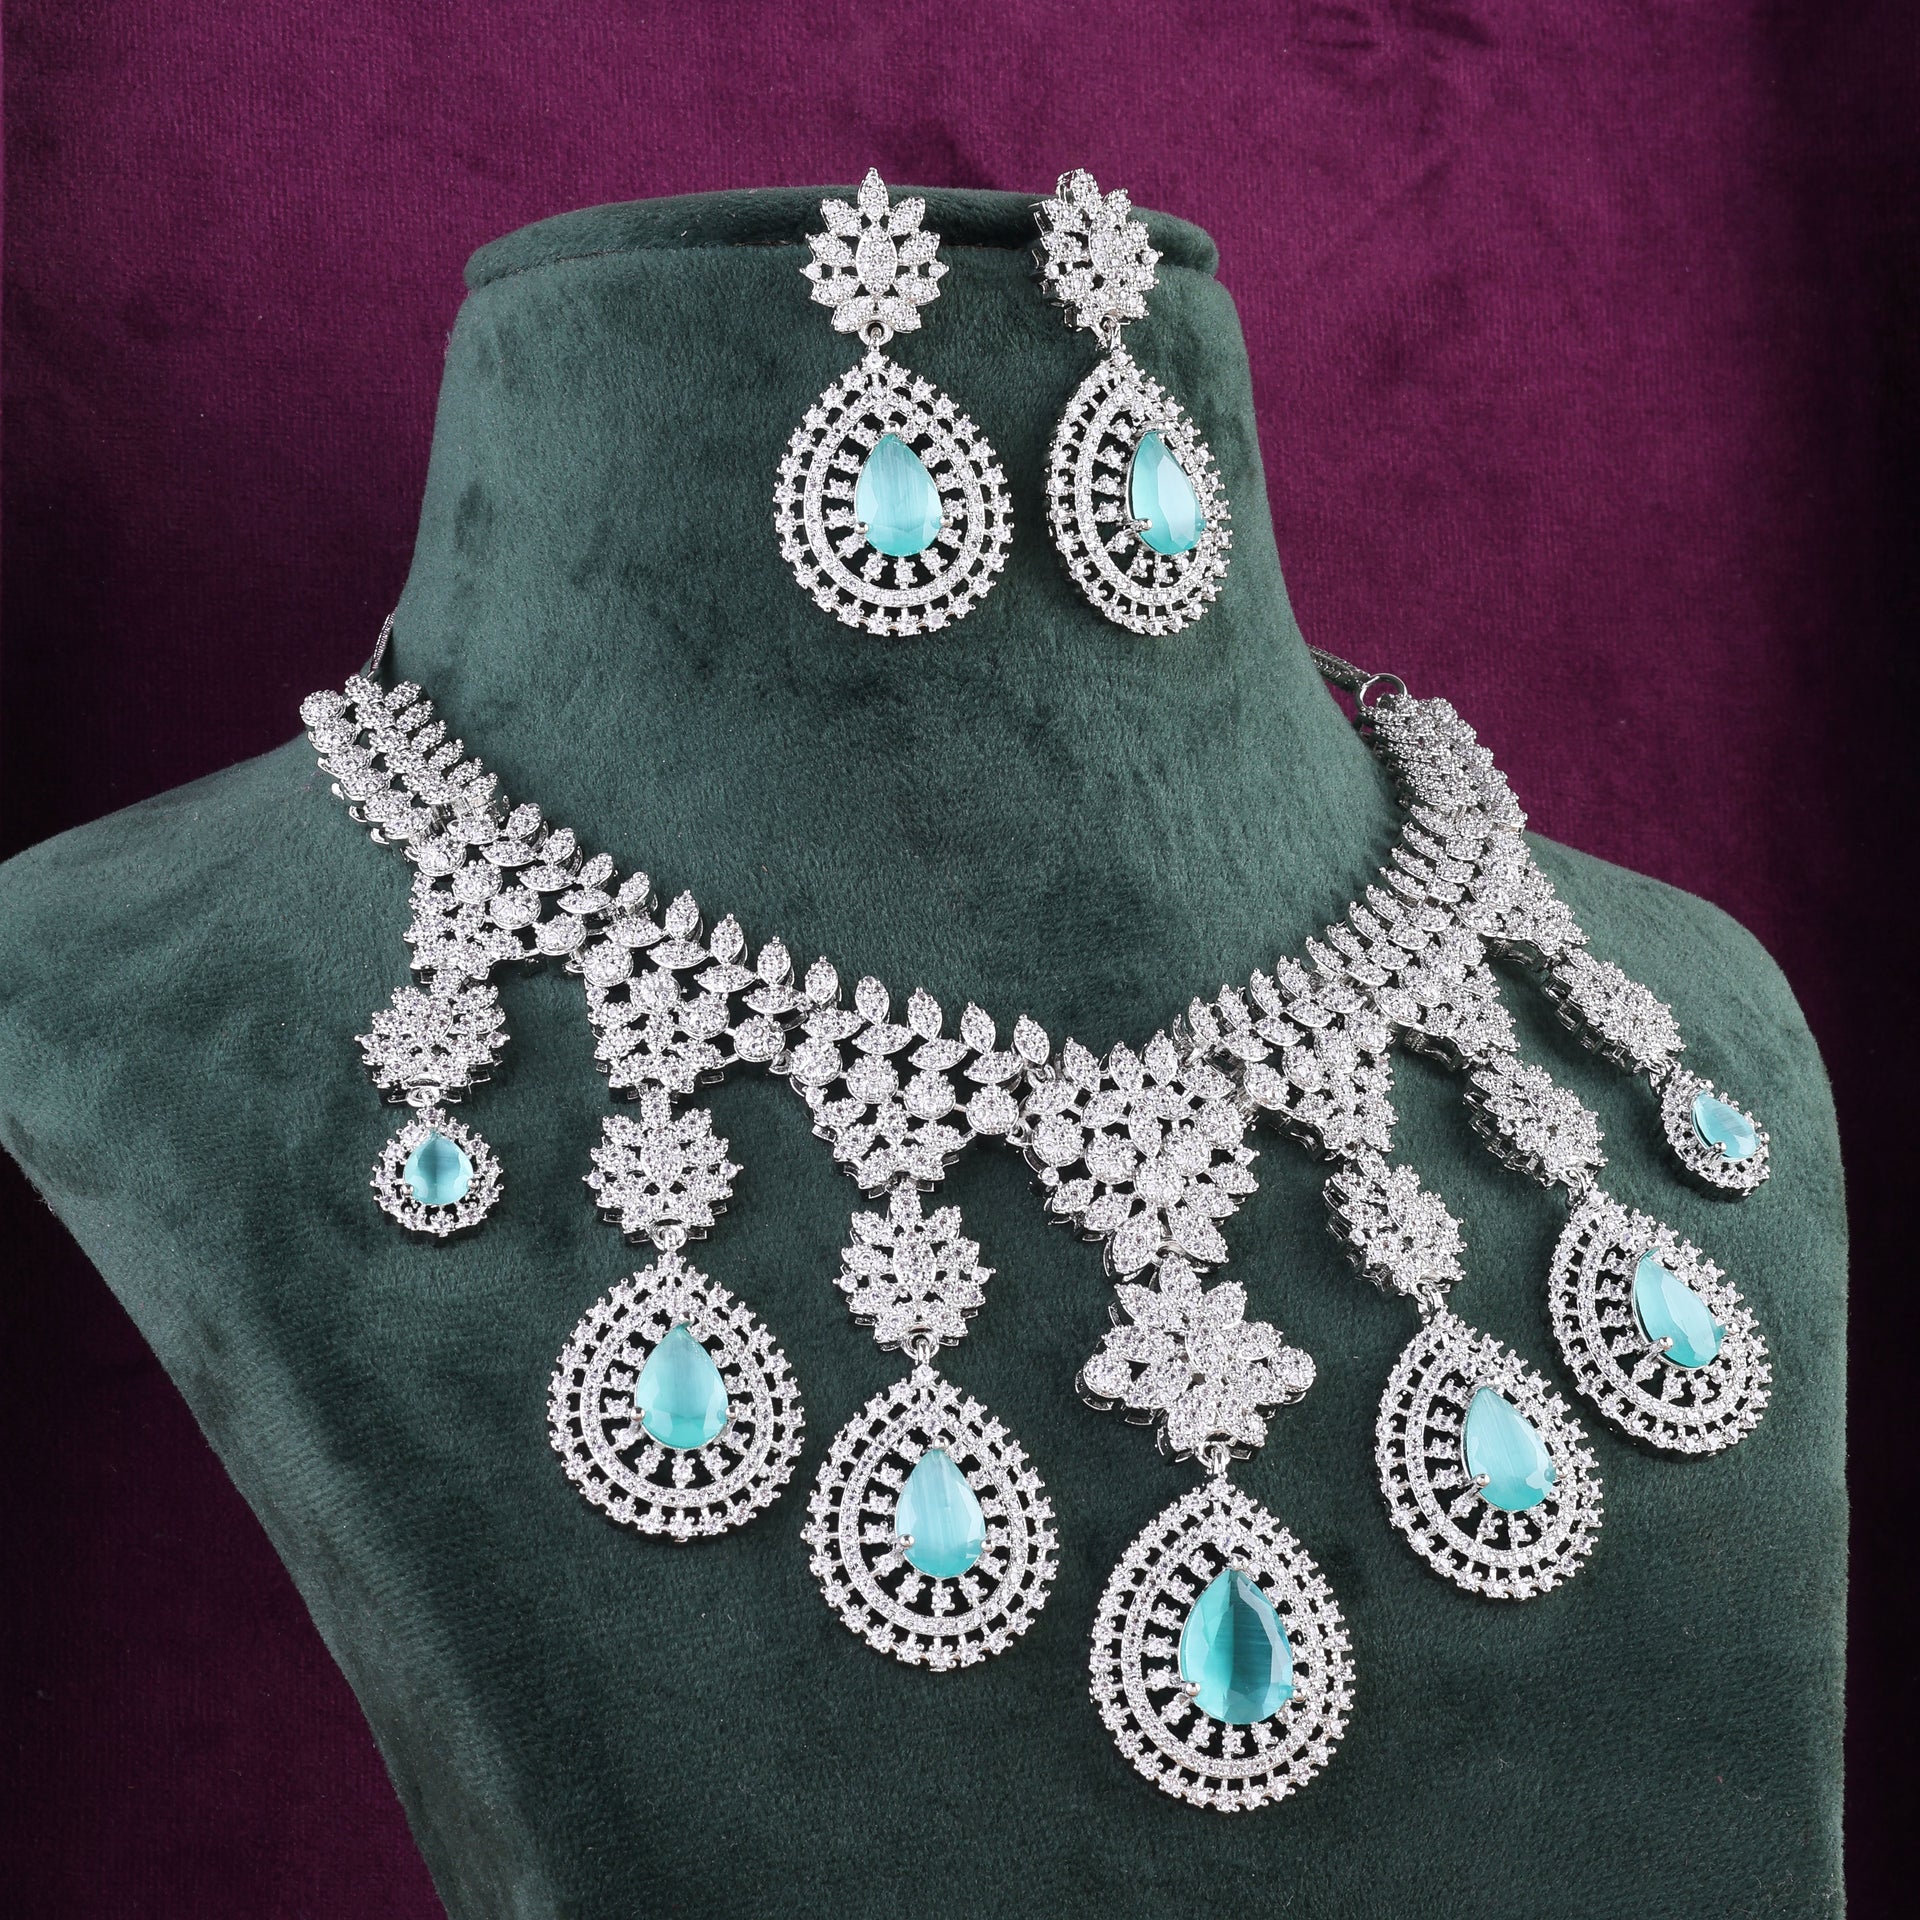 Mint Anastasia American Diamond Necklace with Earring